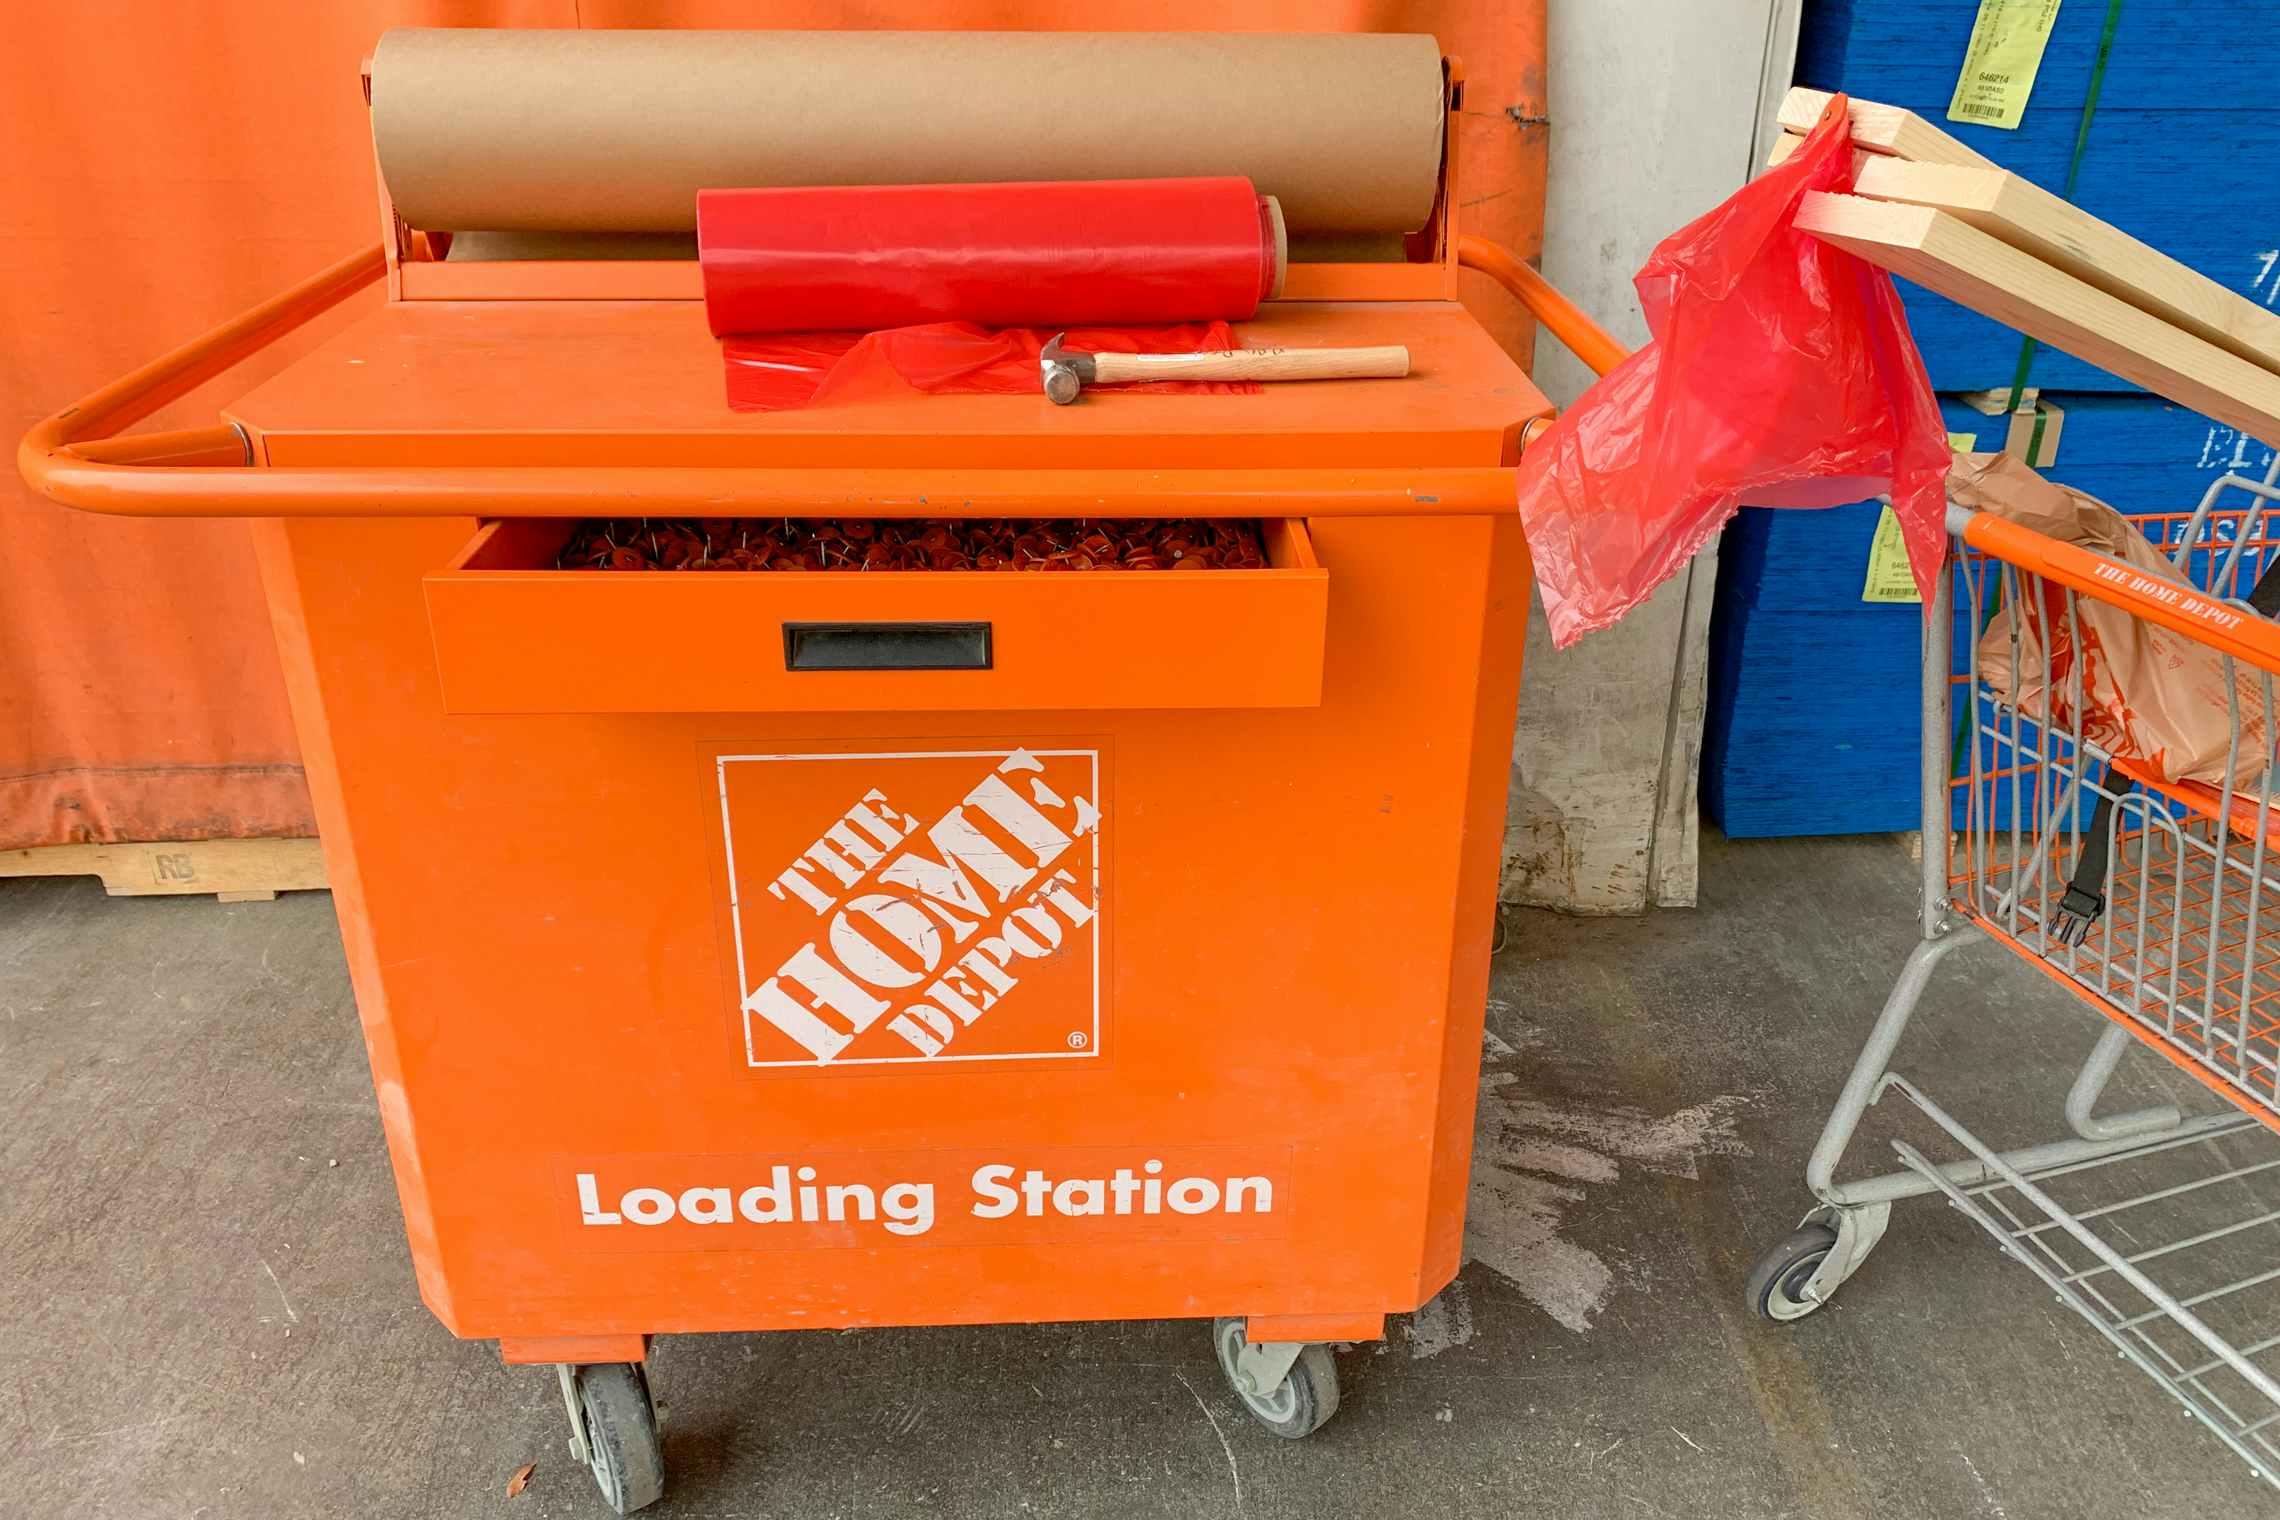 The home depot loading station cart with a hammer, red plastic flags and brown paper next to a cart with lumber in it.